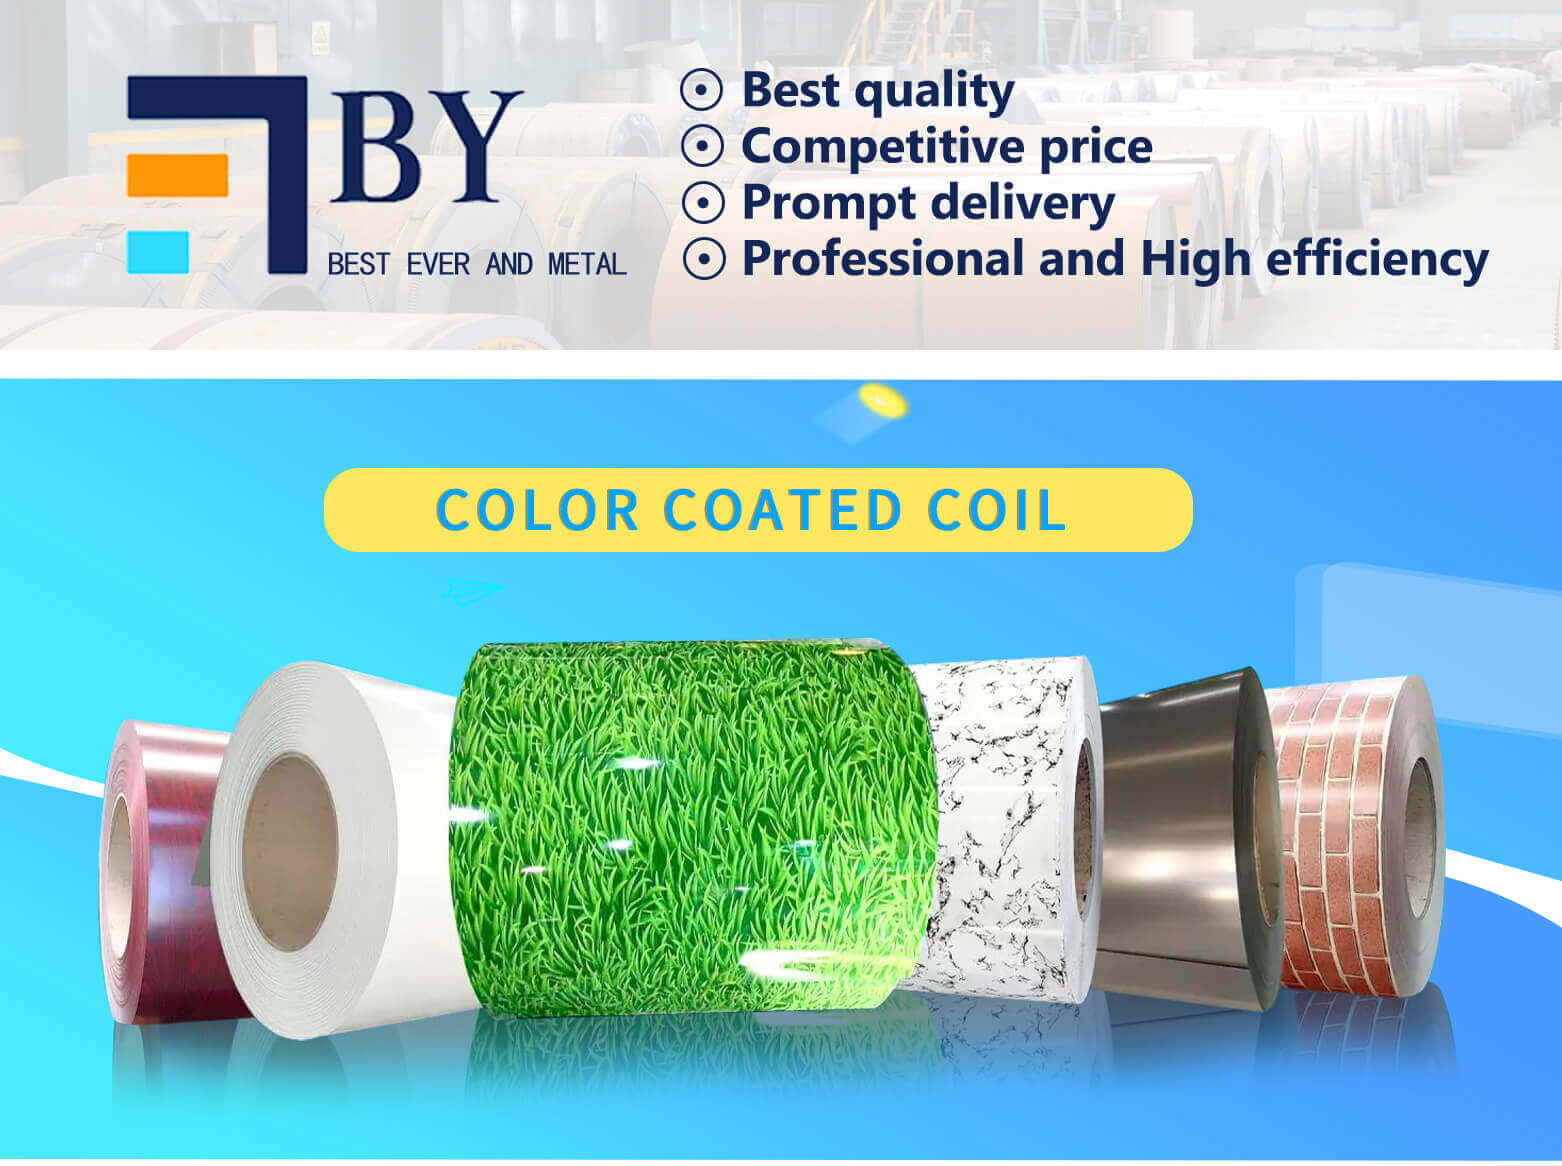 color coated coil 1.jpg